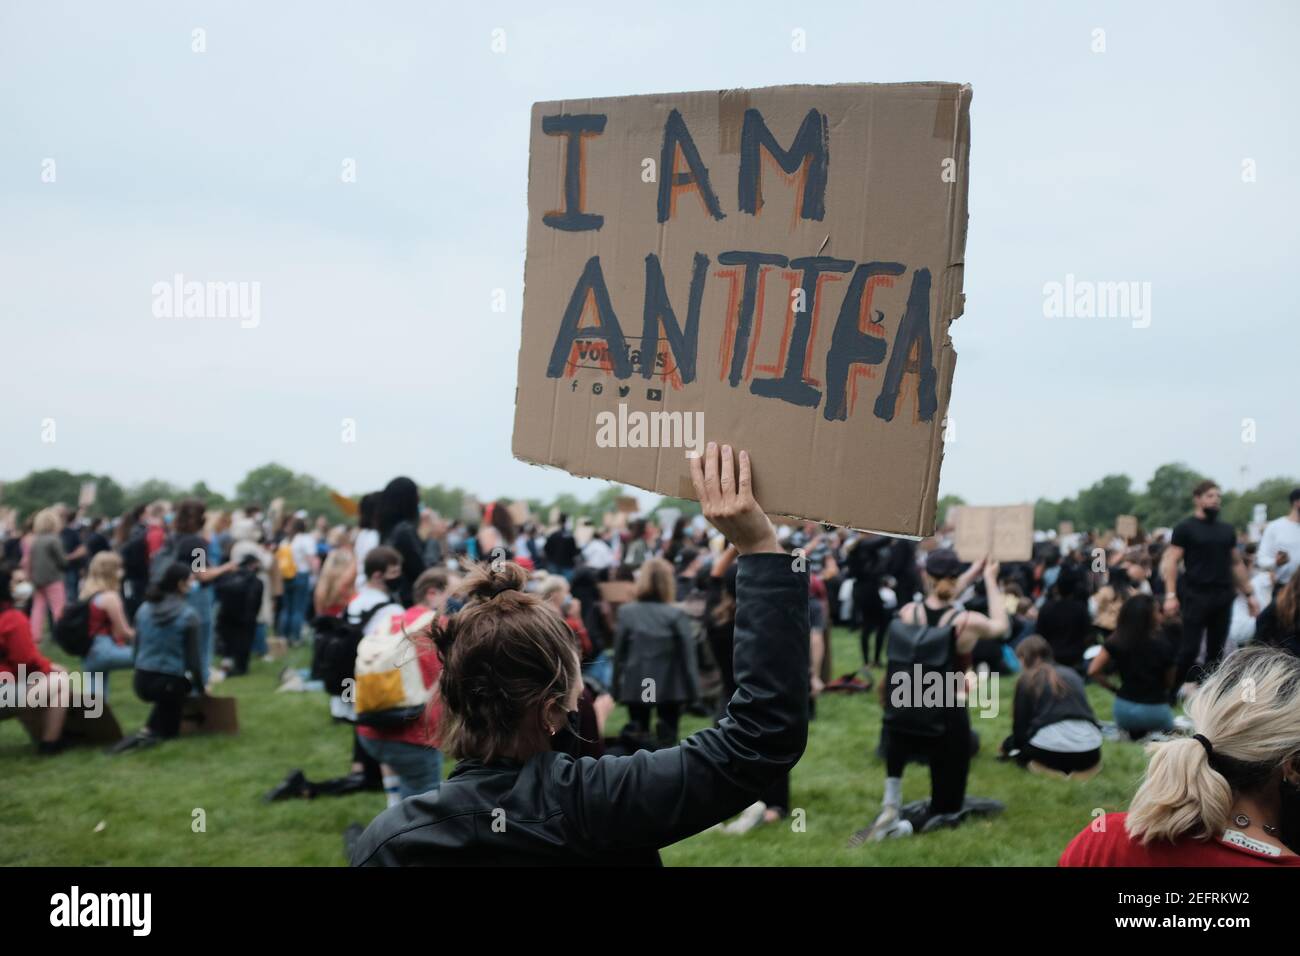 LONDON - 3RD JUNE 2020: Black Lives Matter protest on Speakers Corner in London. A lady holds a sign saying 'I am Antifa' Stock Photo